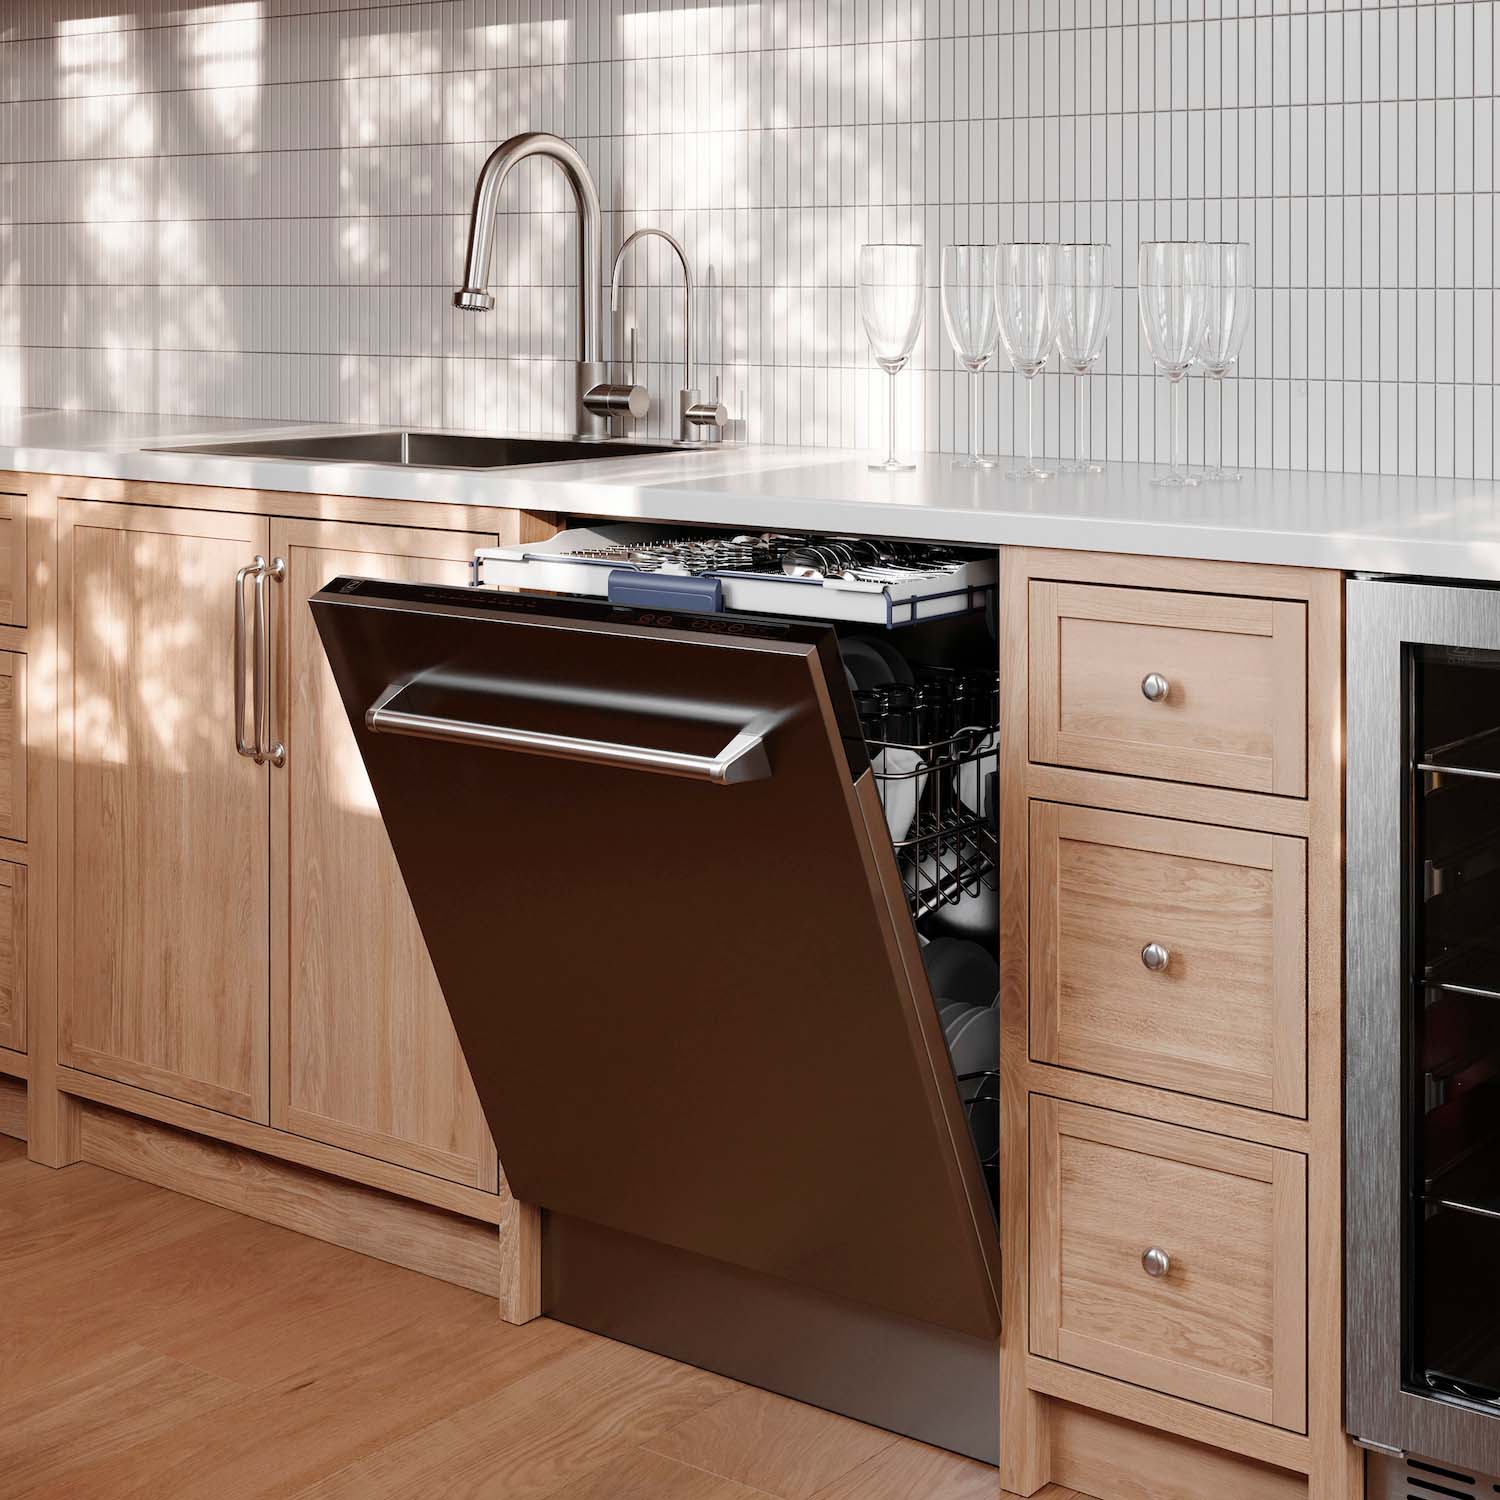 ZLINE built-in dishwasher with stainless steel panel in a luxury kitchen with wood cabinetry and marble countertops.